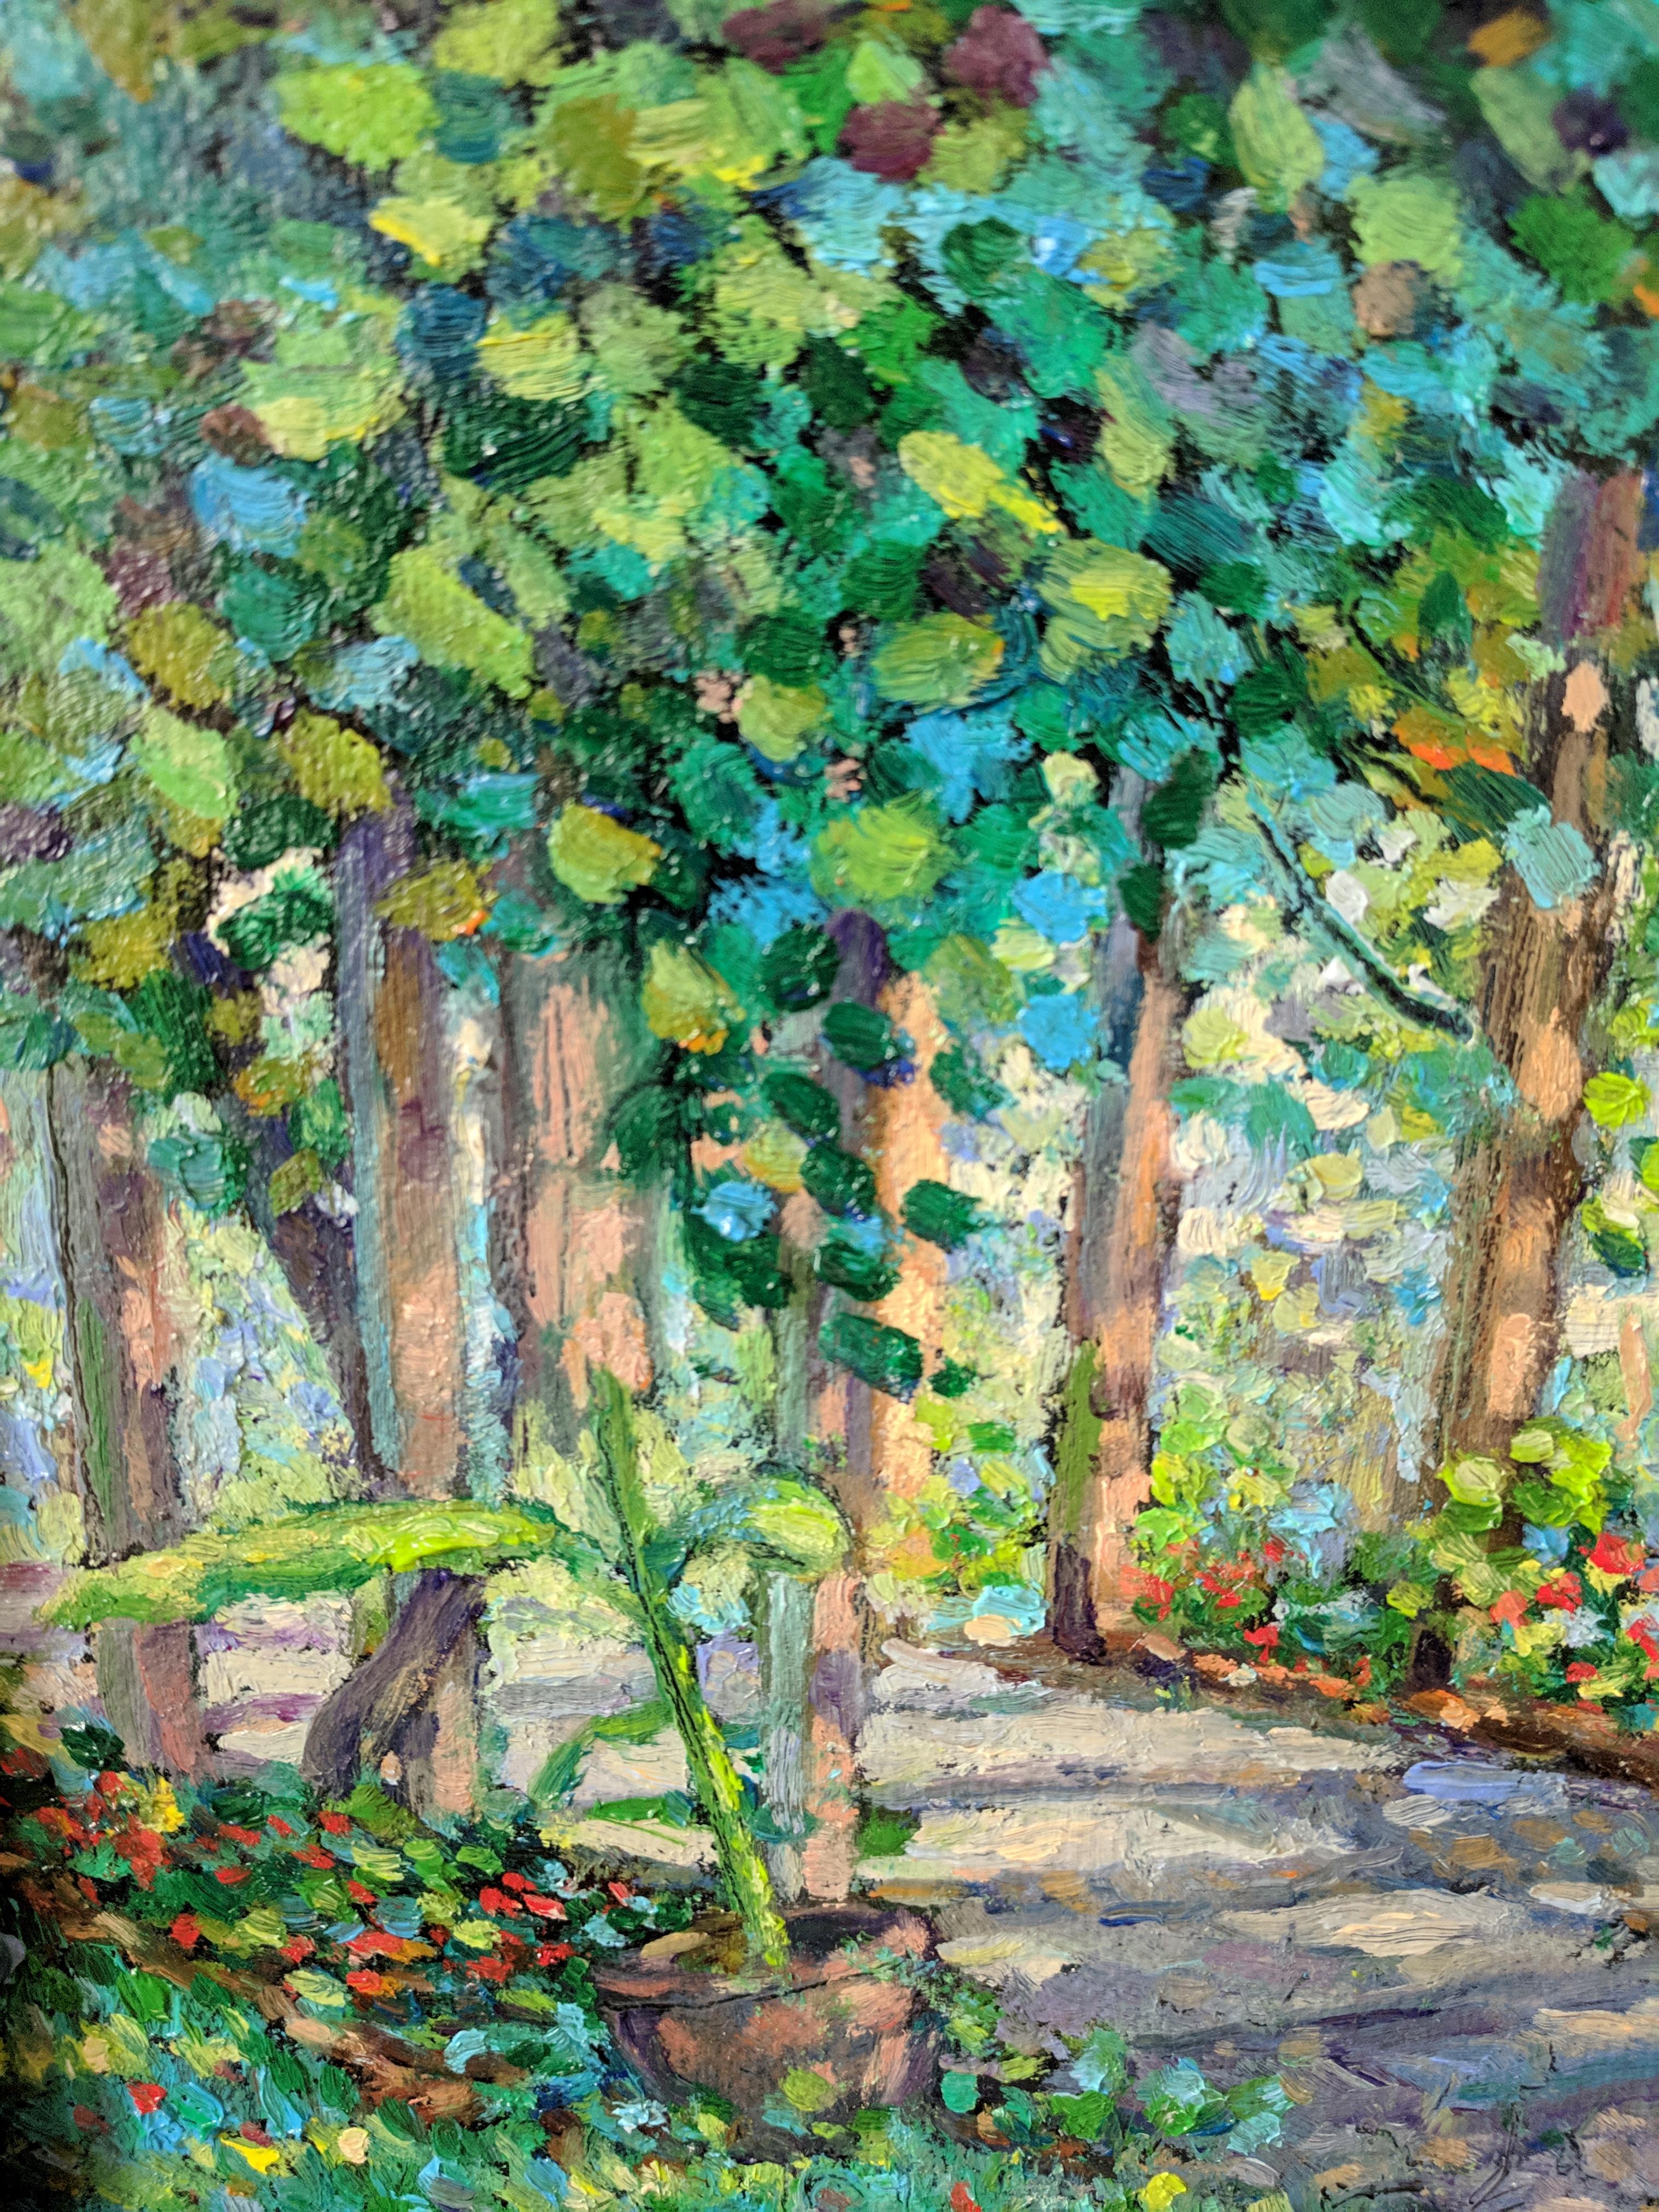 This oil painting on linen is a fine example of an American impressionist landscape by a masterful painter. The painting provides a scene of green and many-hued trees that give an embrace to a stone path. The light filtering through the leaves give